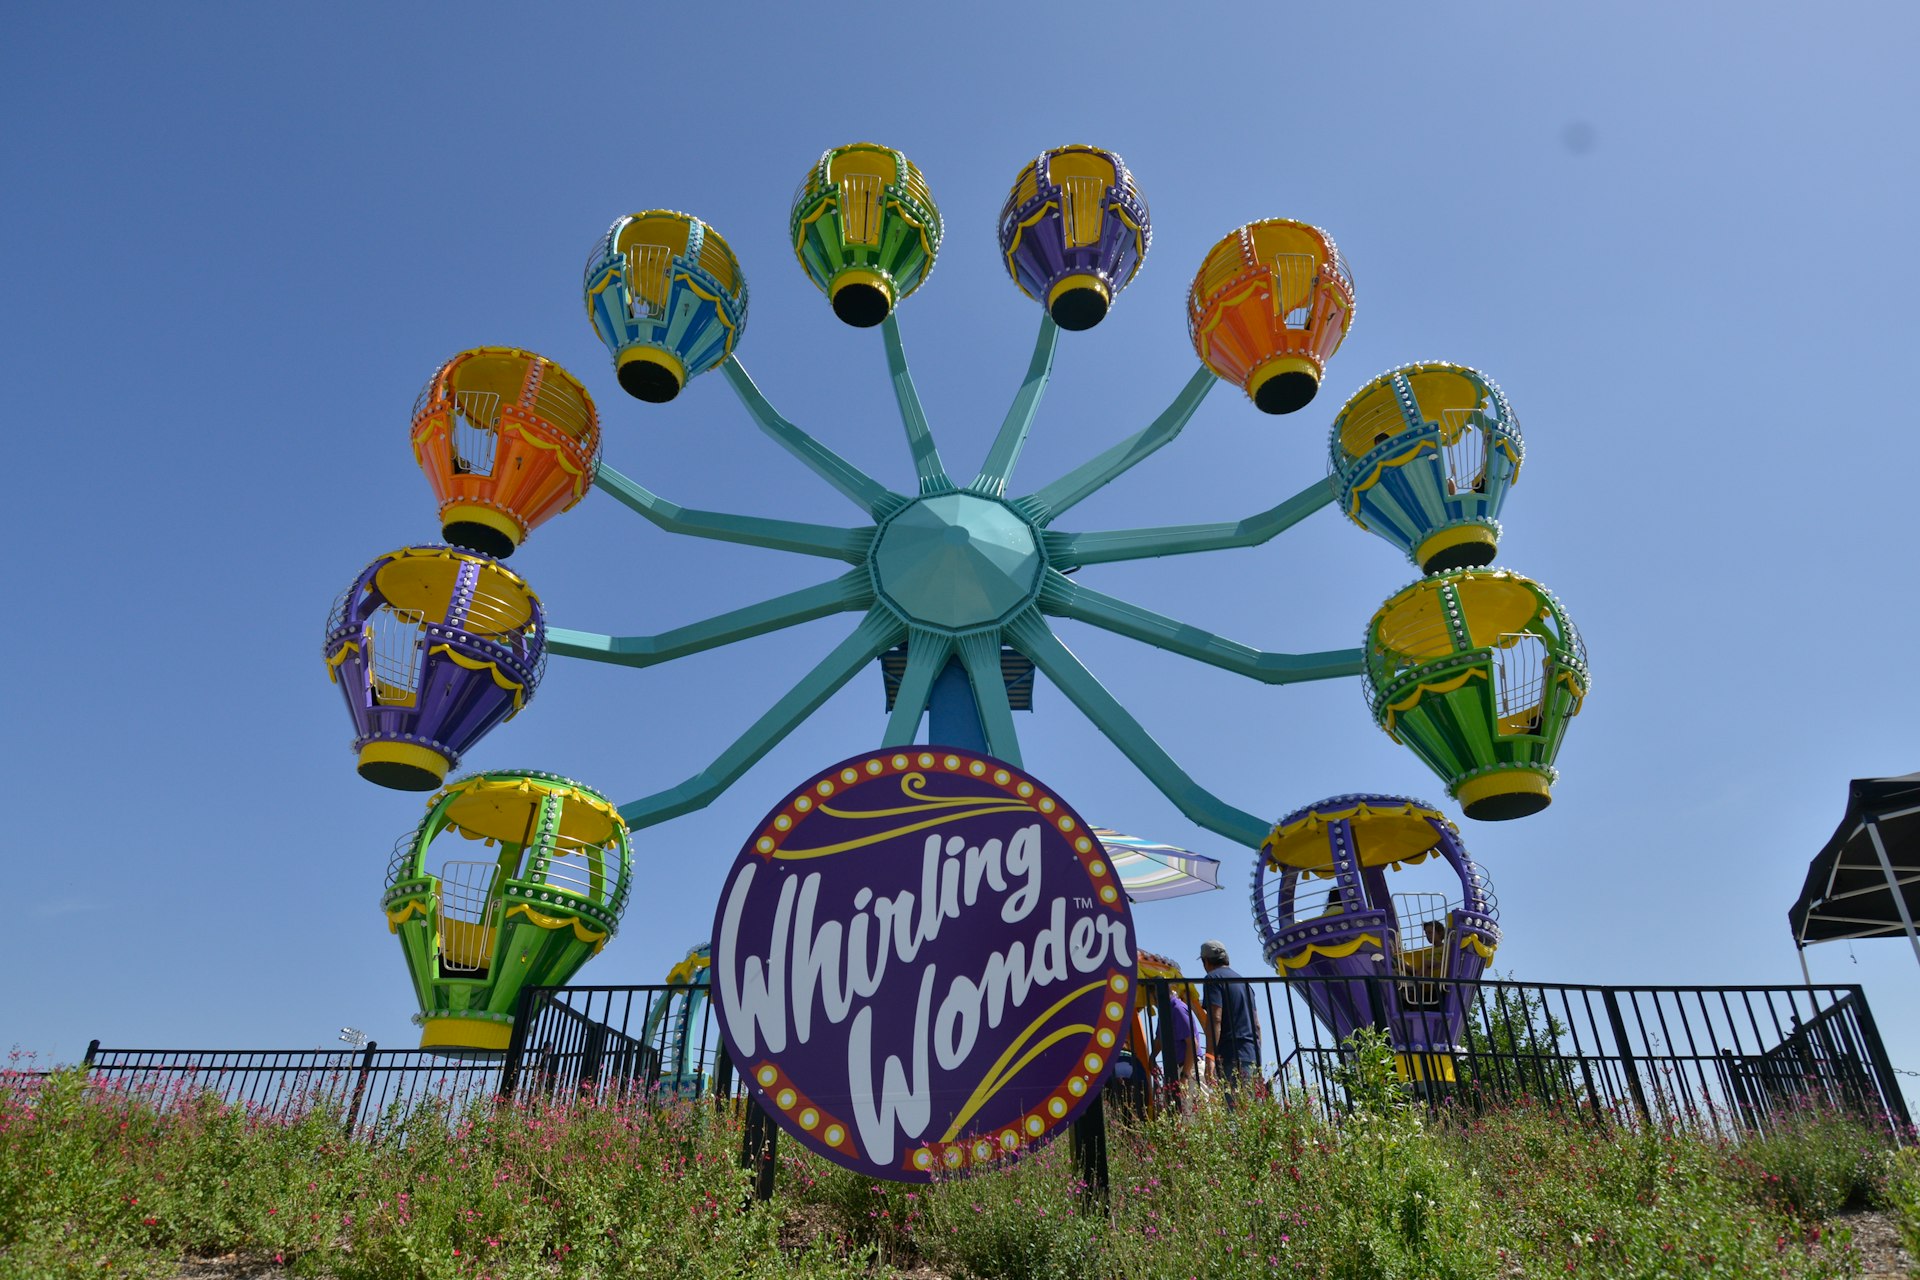 A brightly colored Ferris Wheel with large wheelchair-accessible compartments